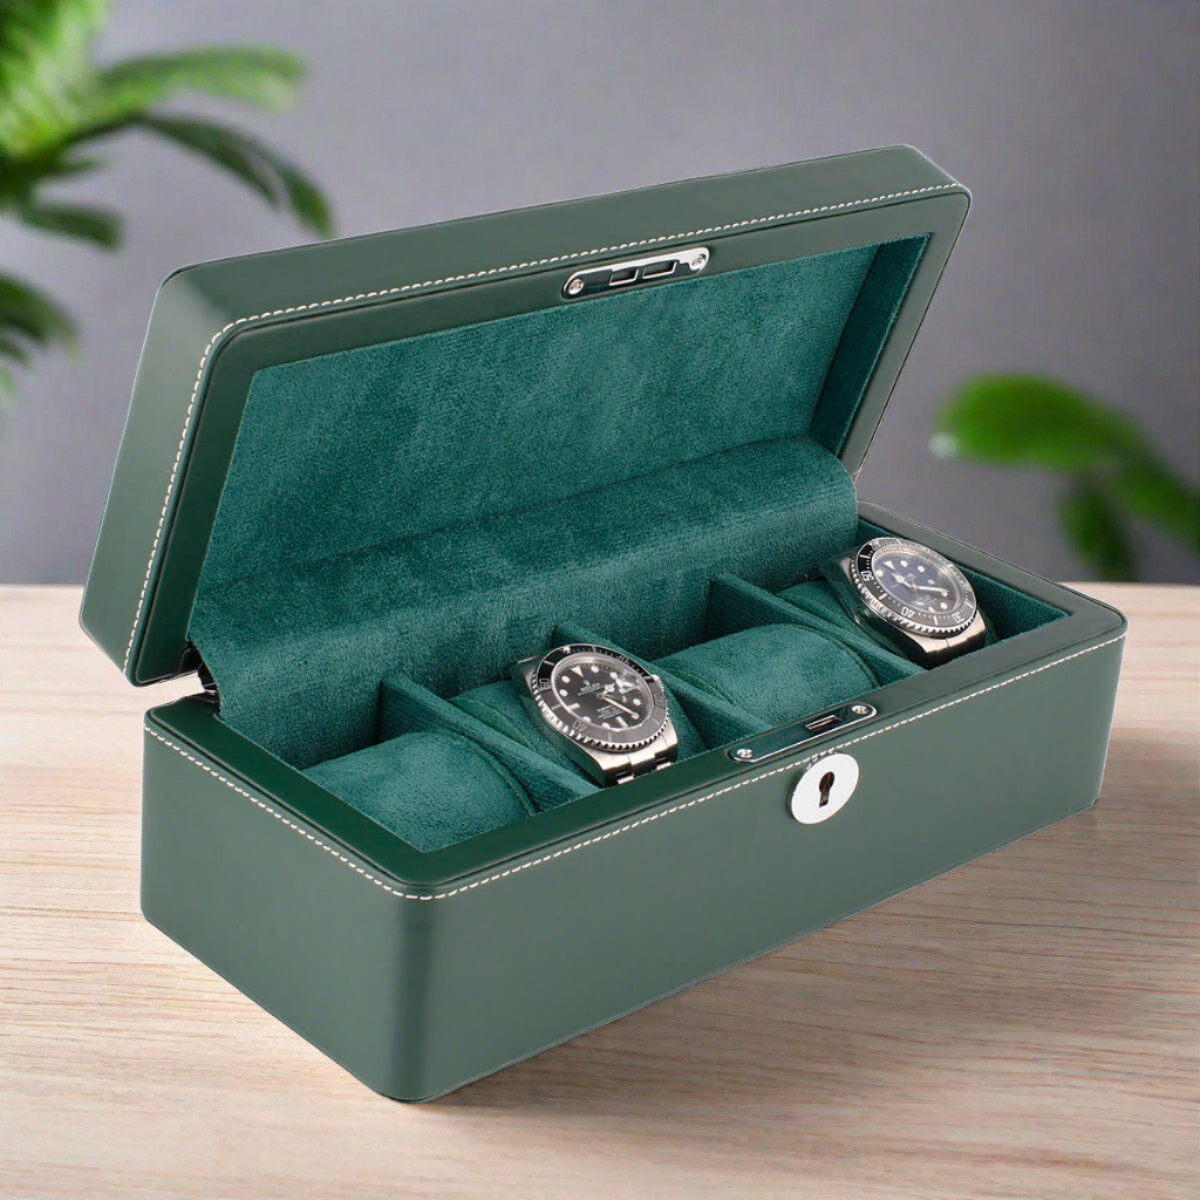 Protecting Your Timepieces: Watch Roll Cases vs. Watch Boxes